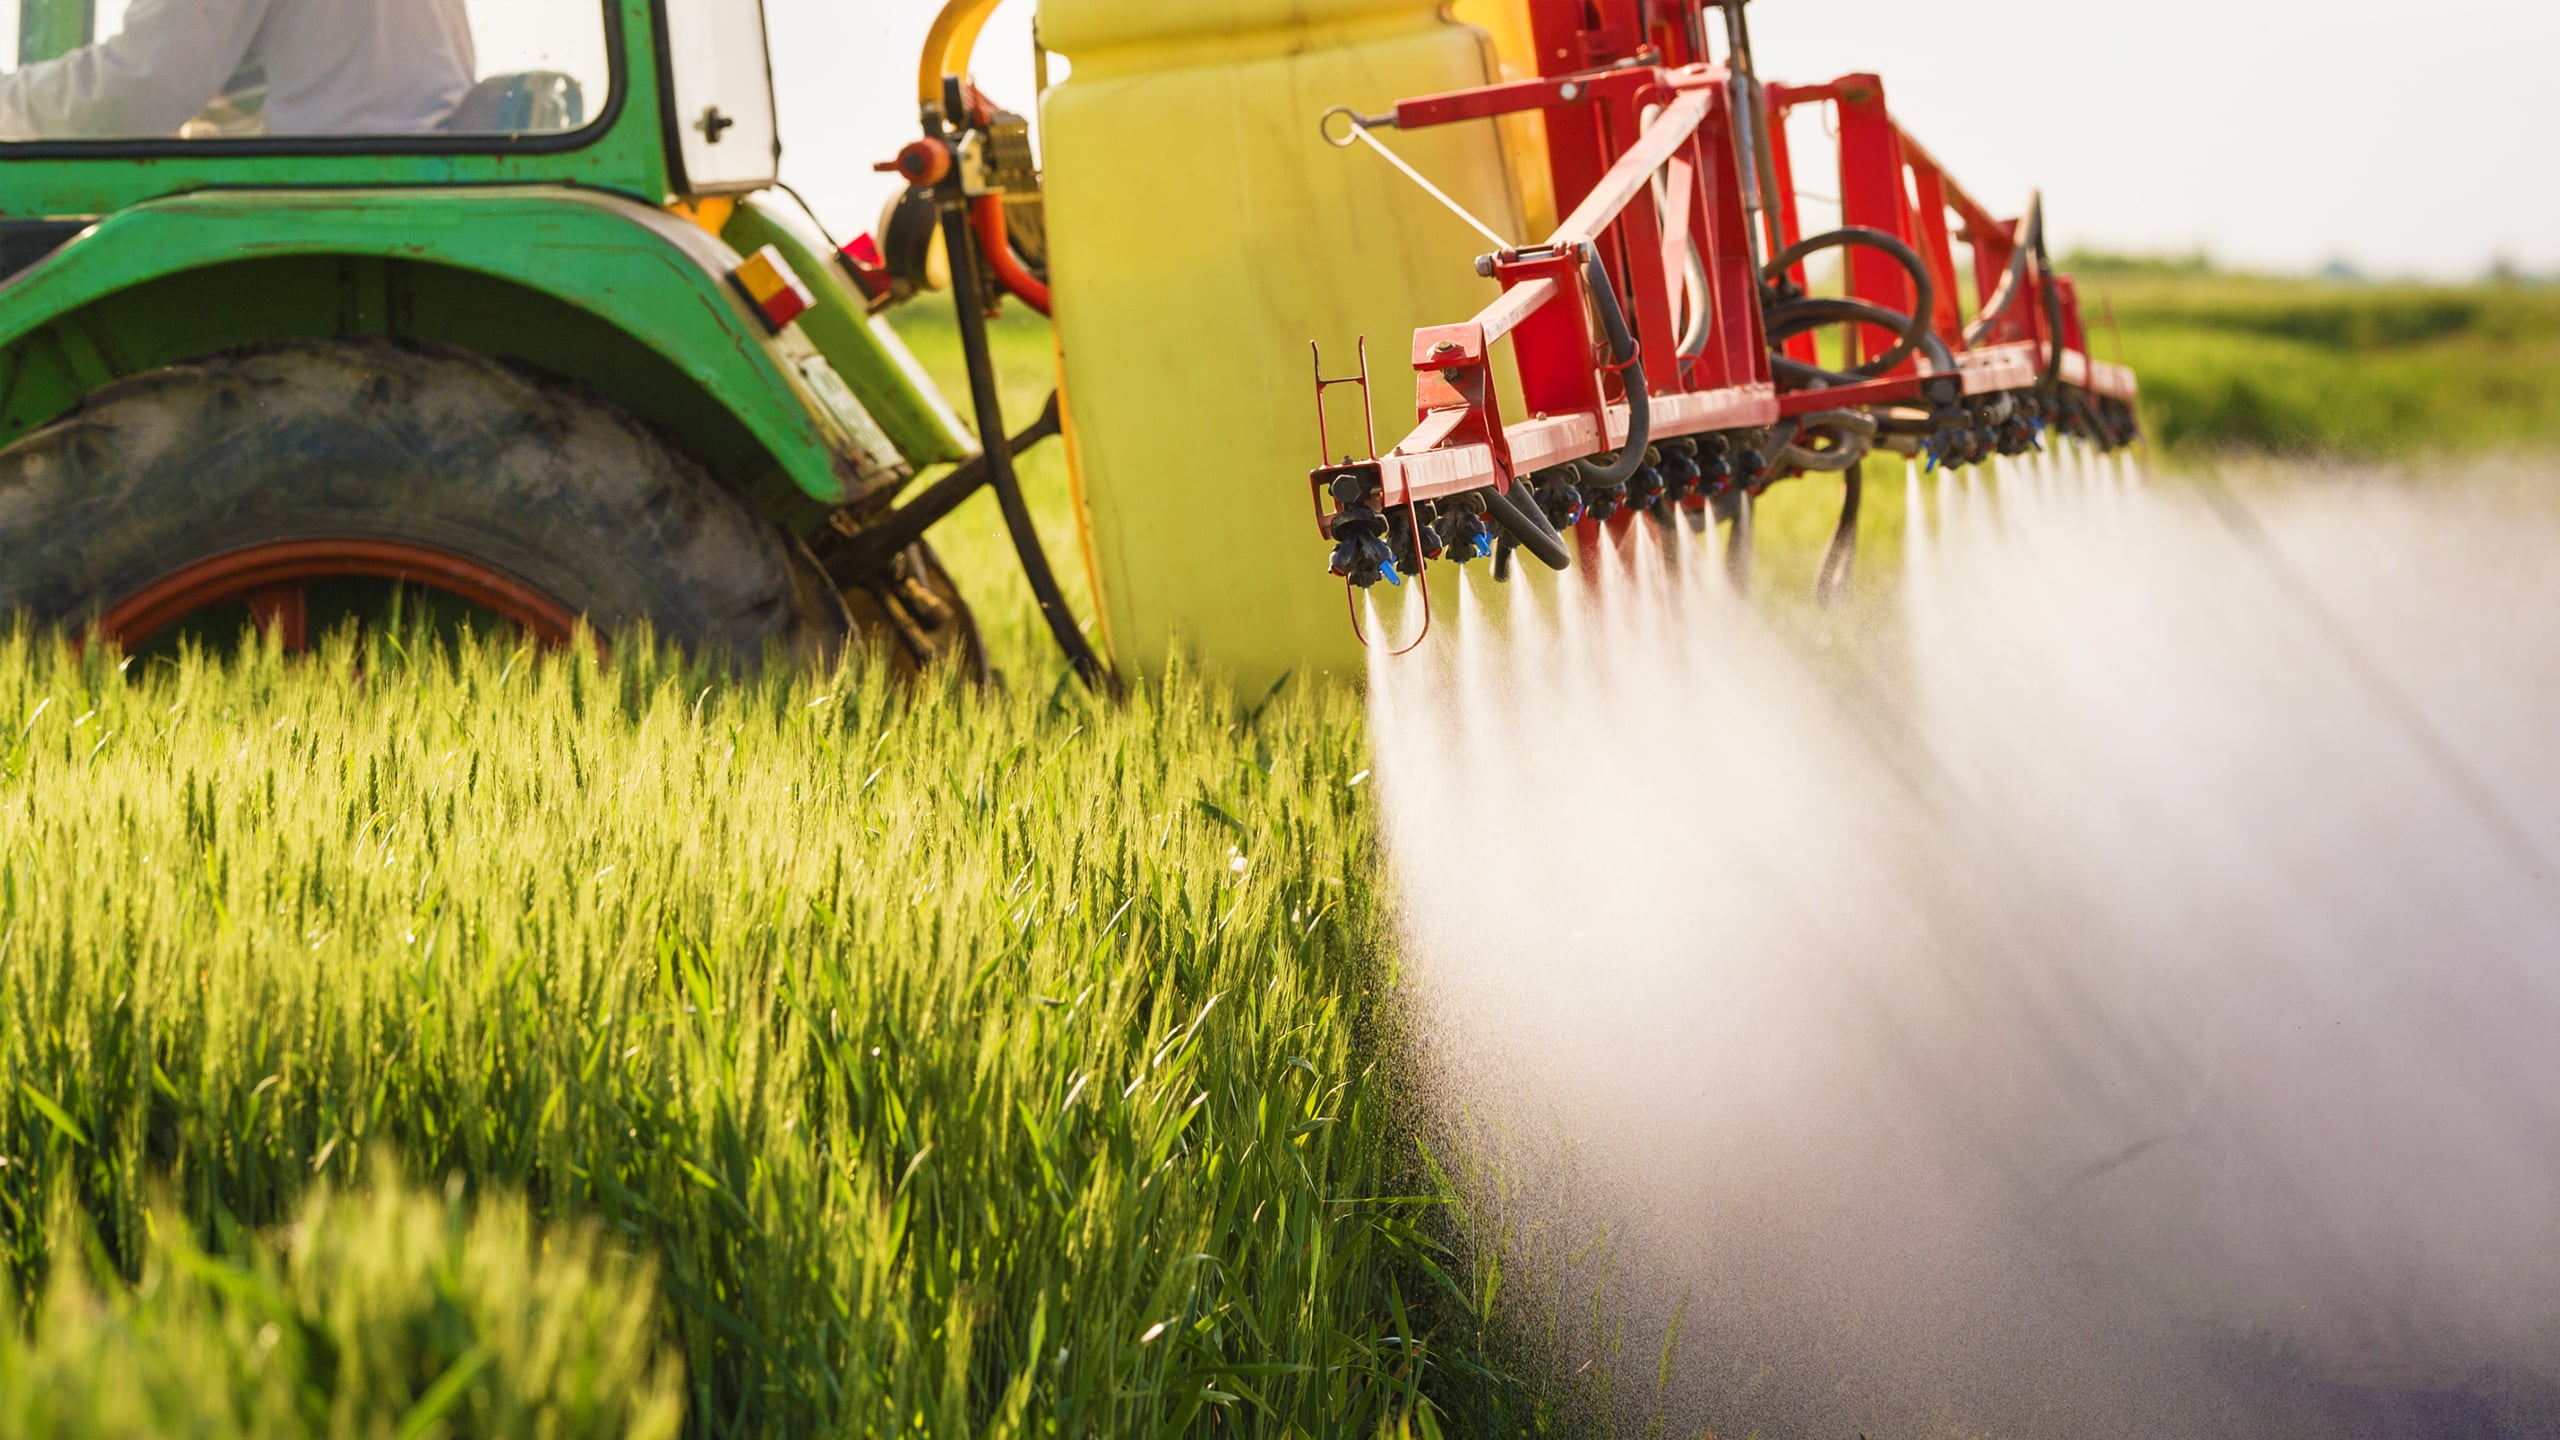 Tractor spraying fertiliser product on wheat field, as an employee in regulatory affairs, we regulate such substances